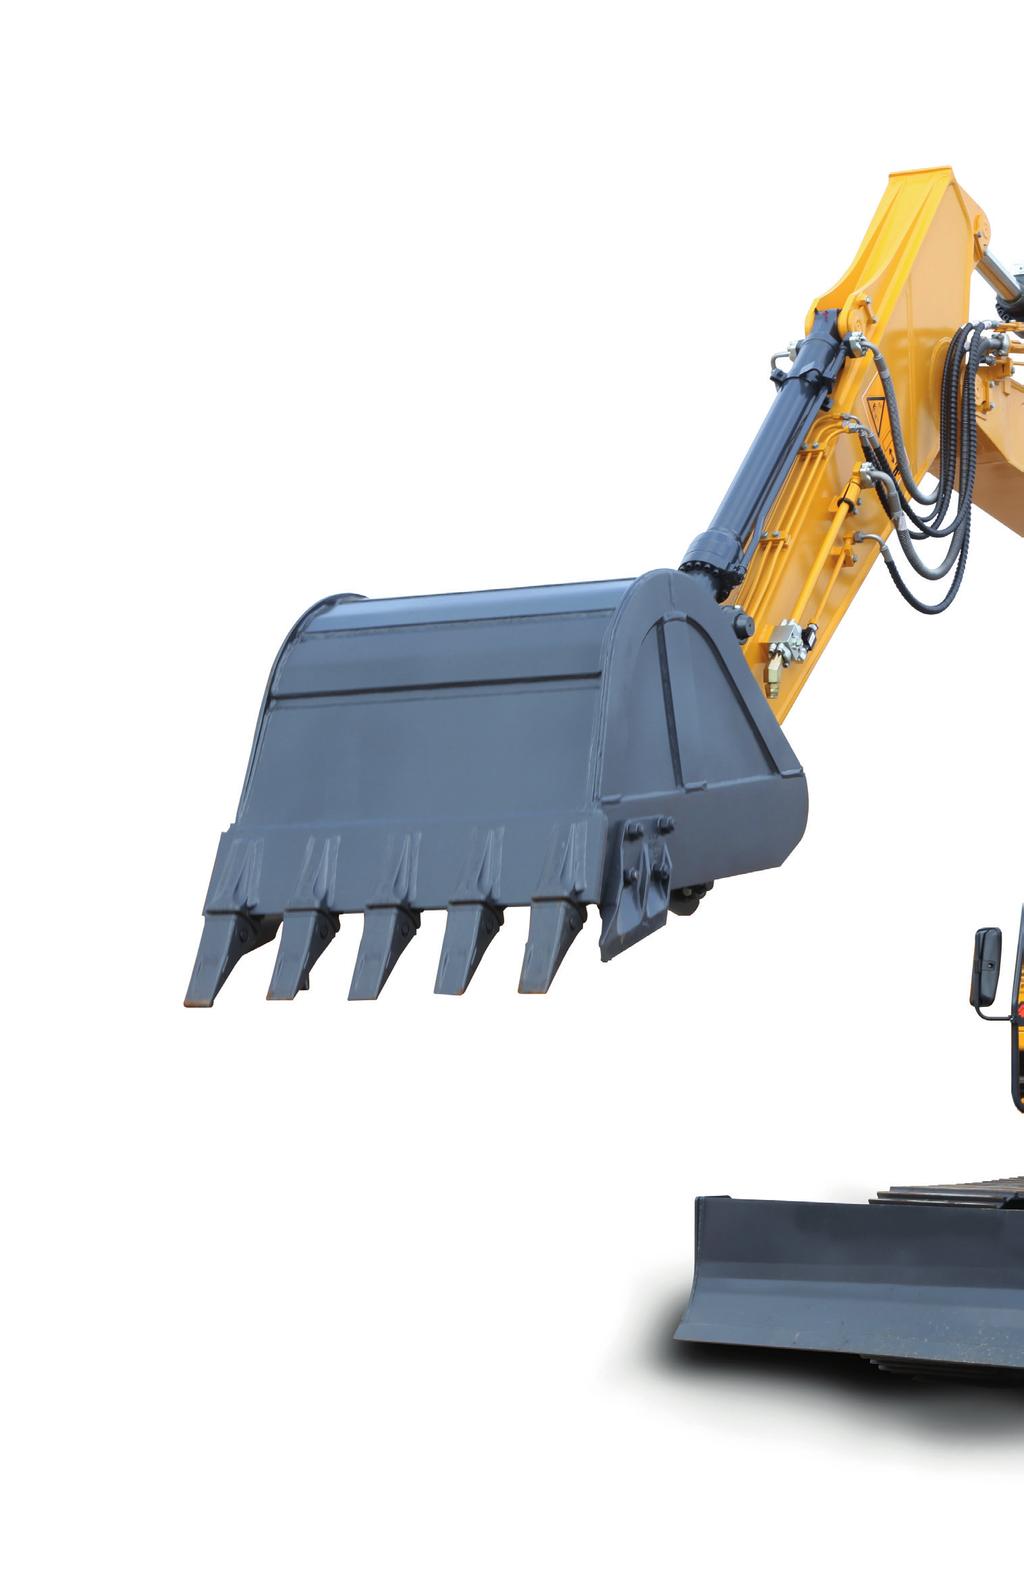 915E EXCAVATOR UNBEATABLE RETURN ON YOUR INVESTMENT LiuGong s customer-driven design and quality-focused engineering creates lasting value that will deliver to your bottom line.